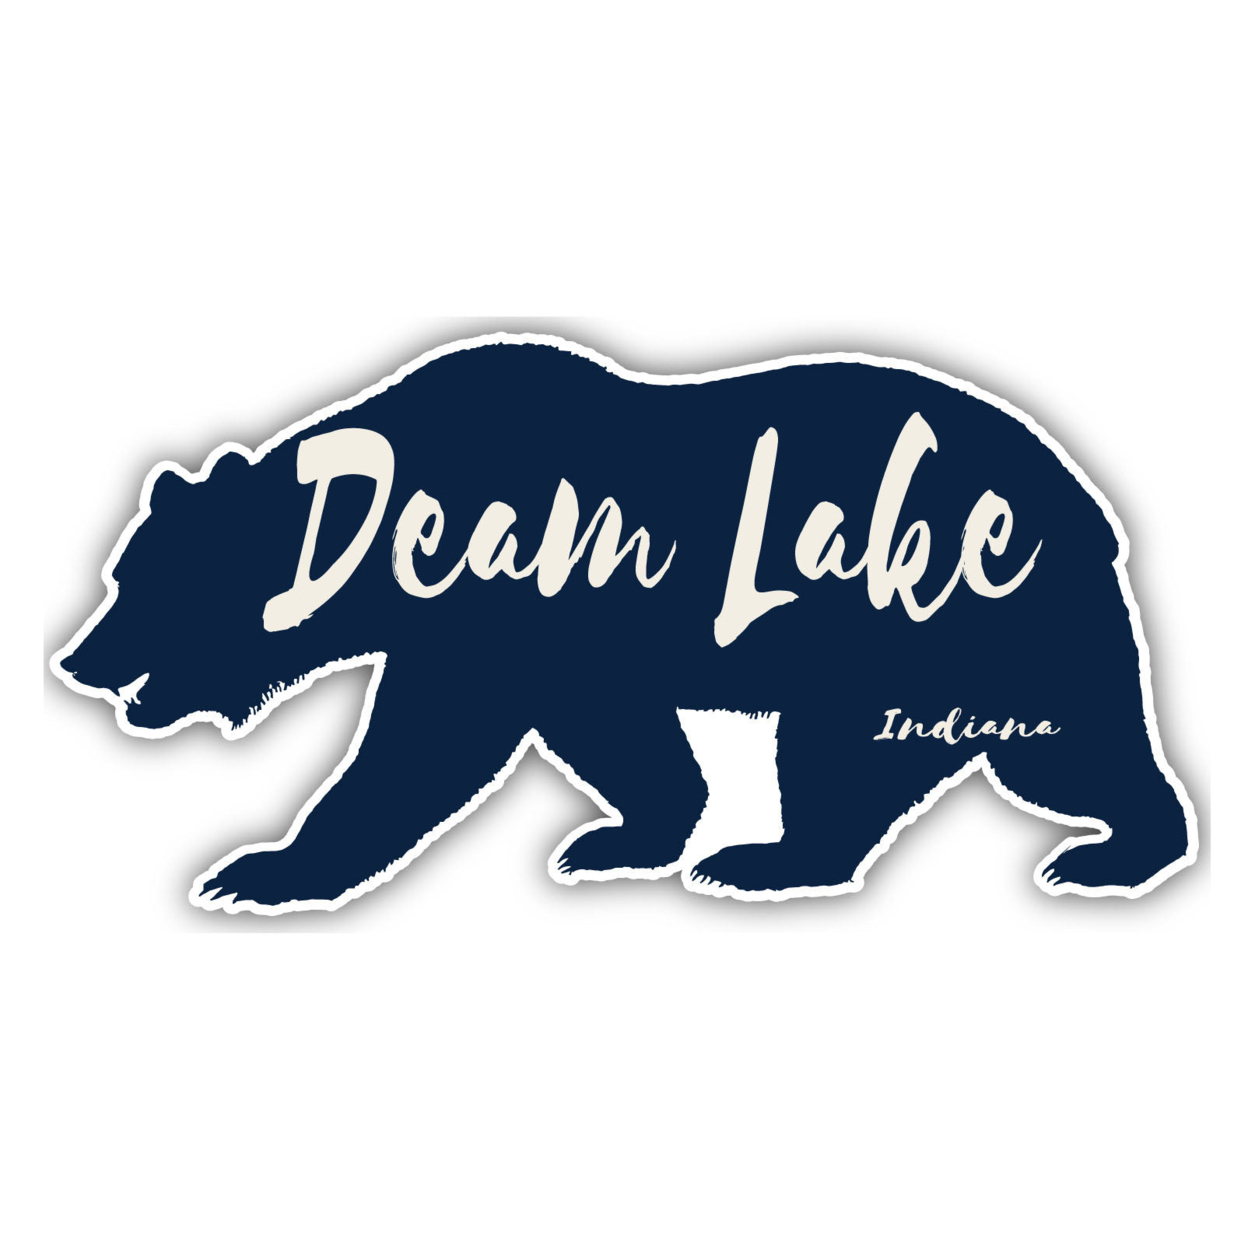 Deam Lake Indiana Souvenir Decorative Stickers (Choose Theme And Size) - Single Unit, 6-Inch, Great Outdoors